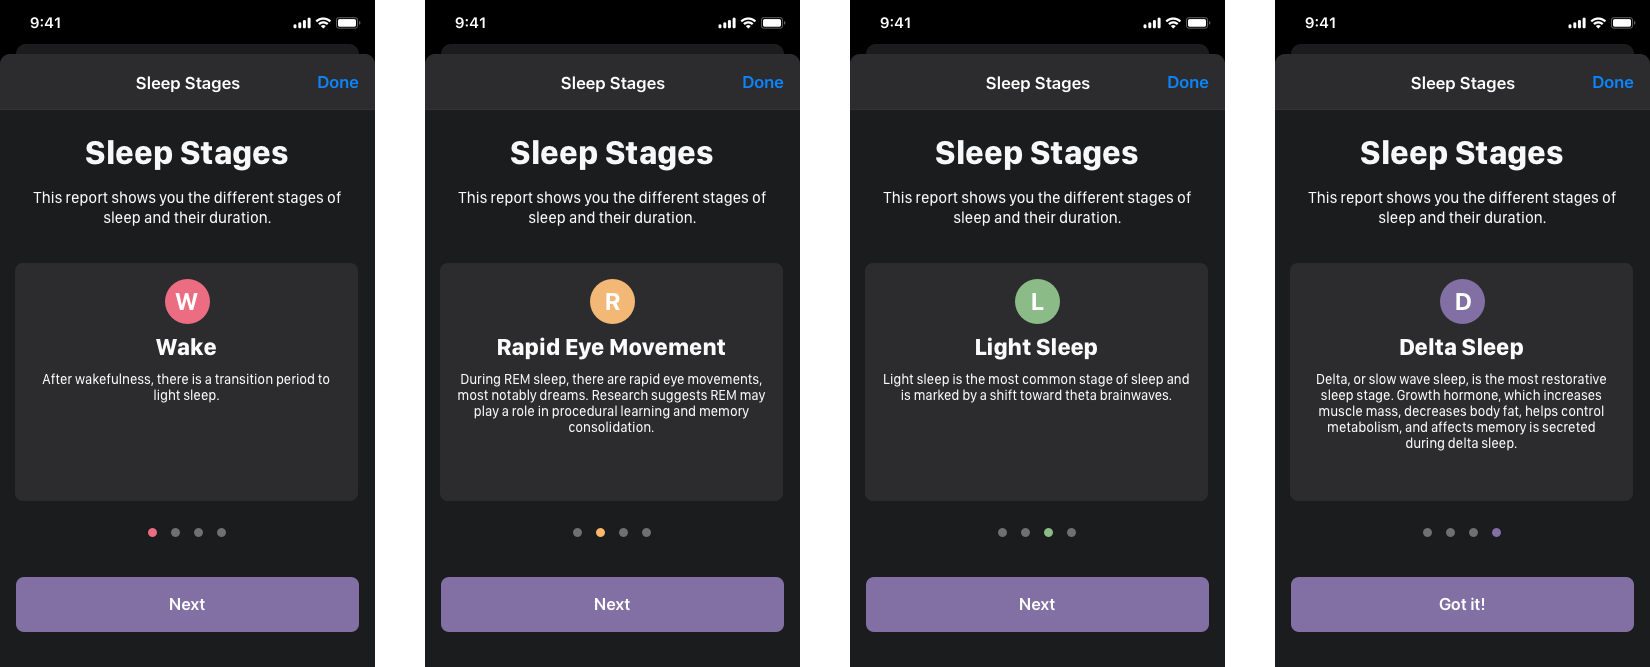 Onboarding Sleep Stages